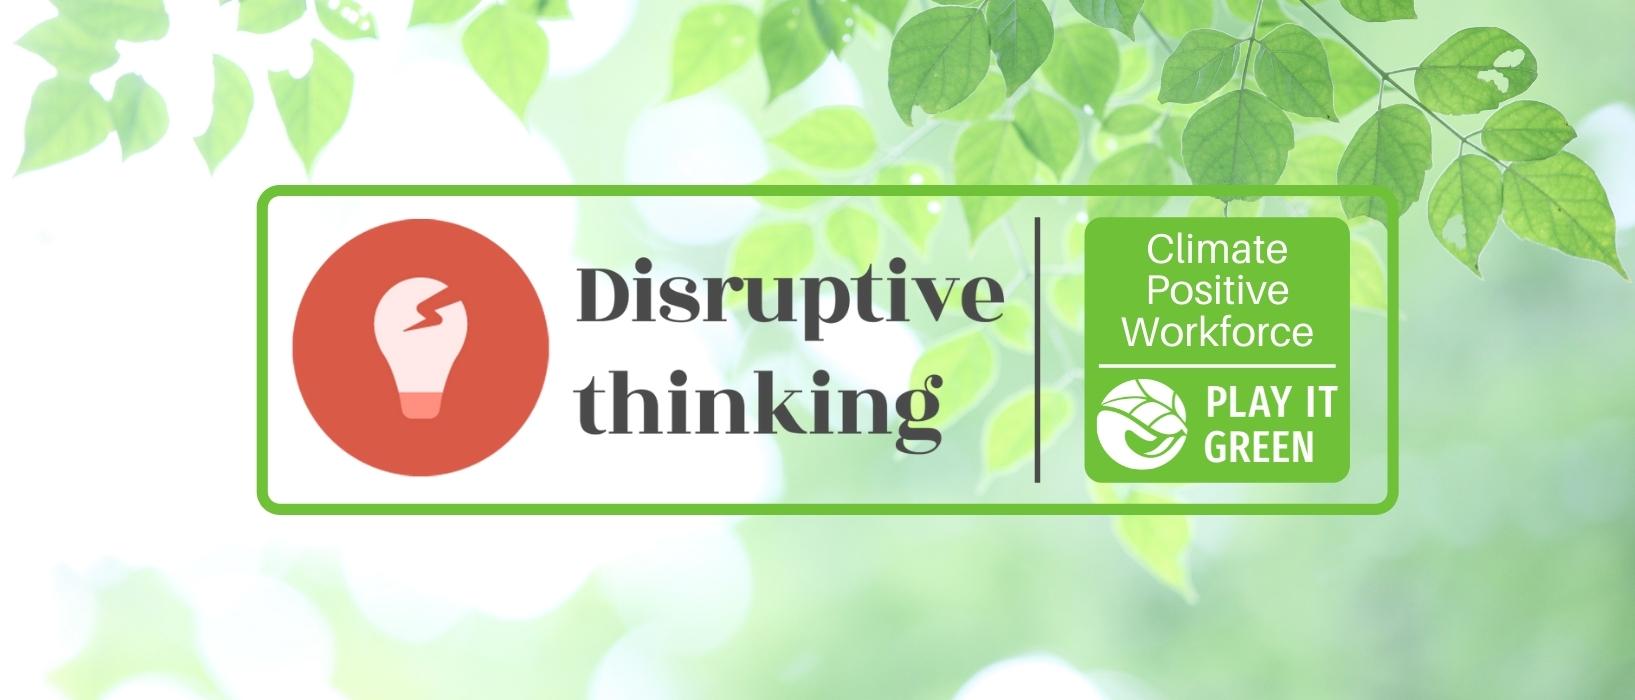 disruptive thinking and Play it Green Climate Positive Workforce logo over background of out-of-focus leaves